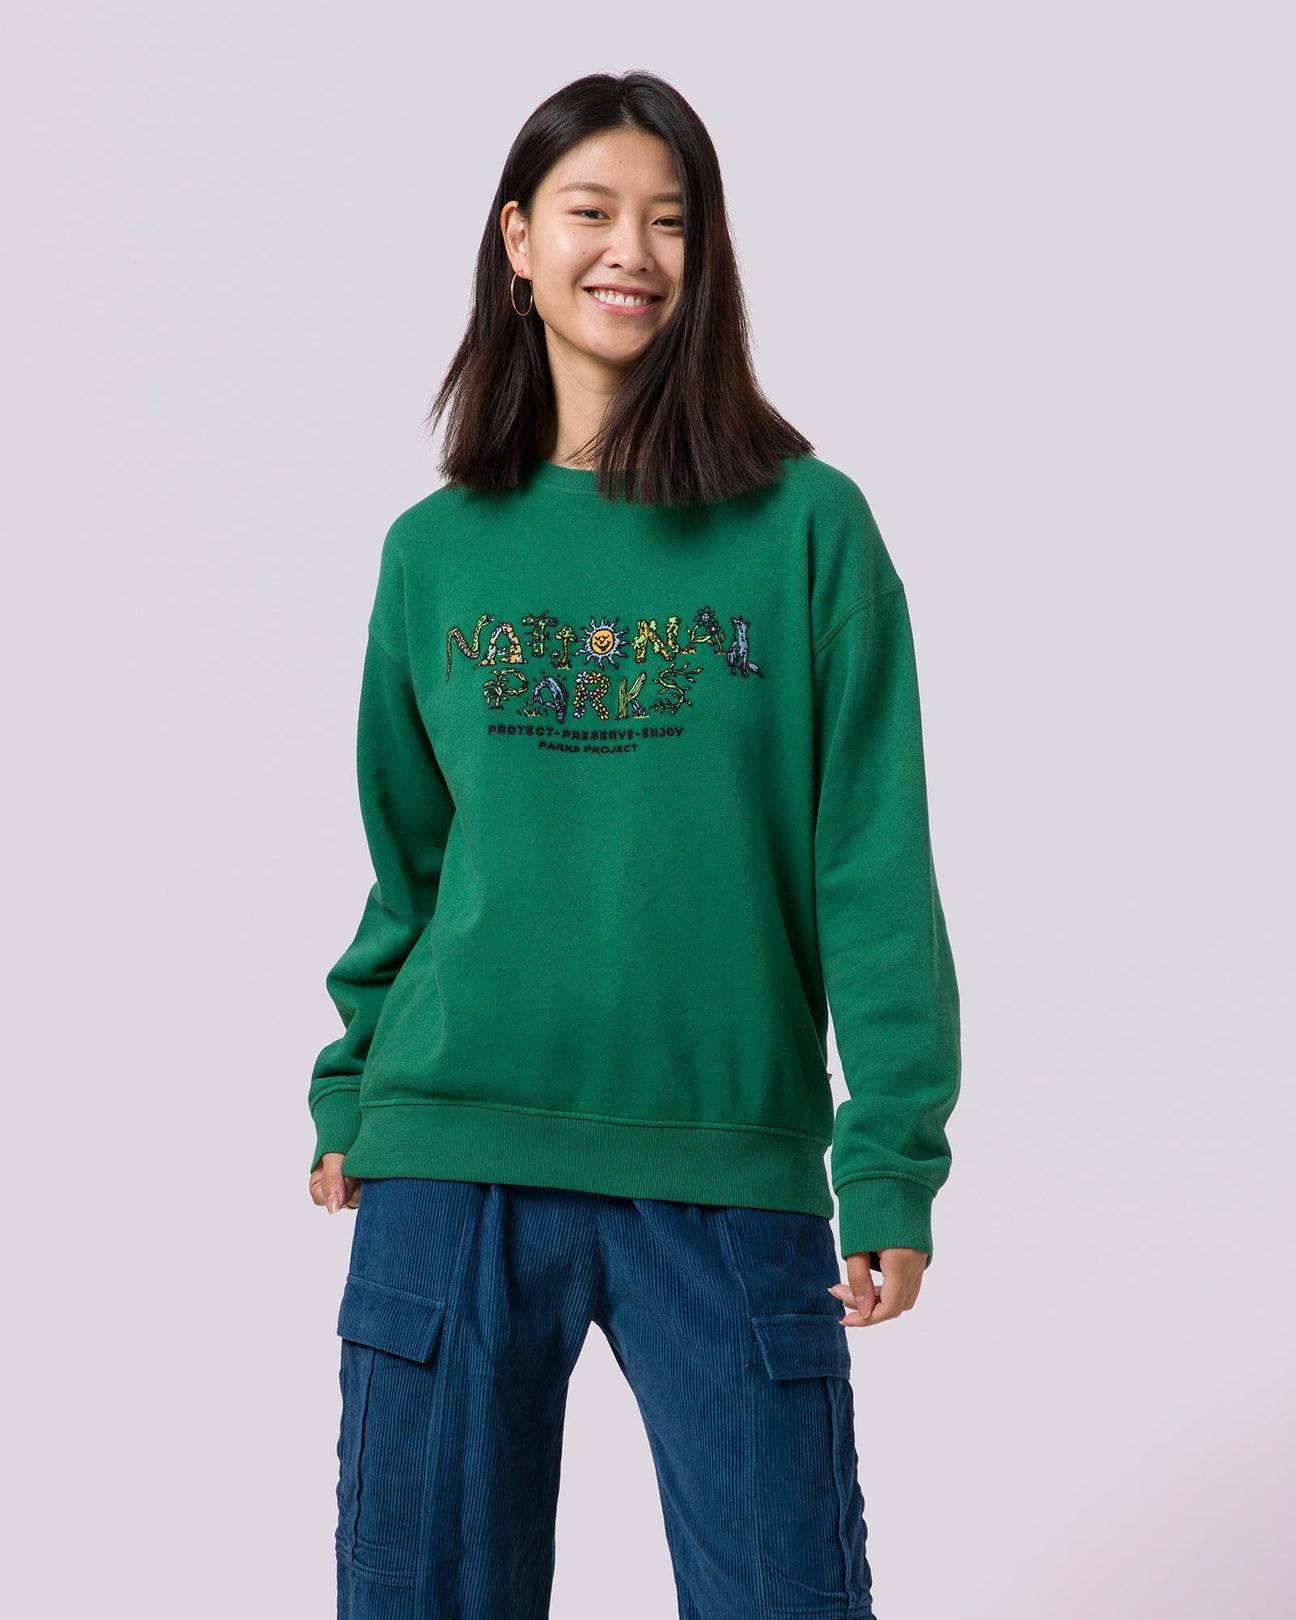 Shop National Parks 90's Crew Inspired by our National Parks – Parks ...